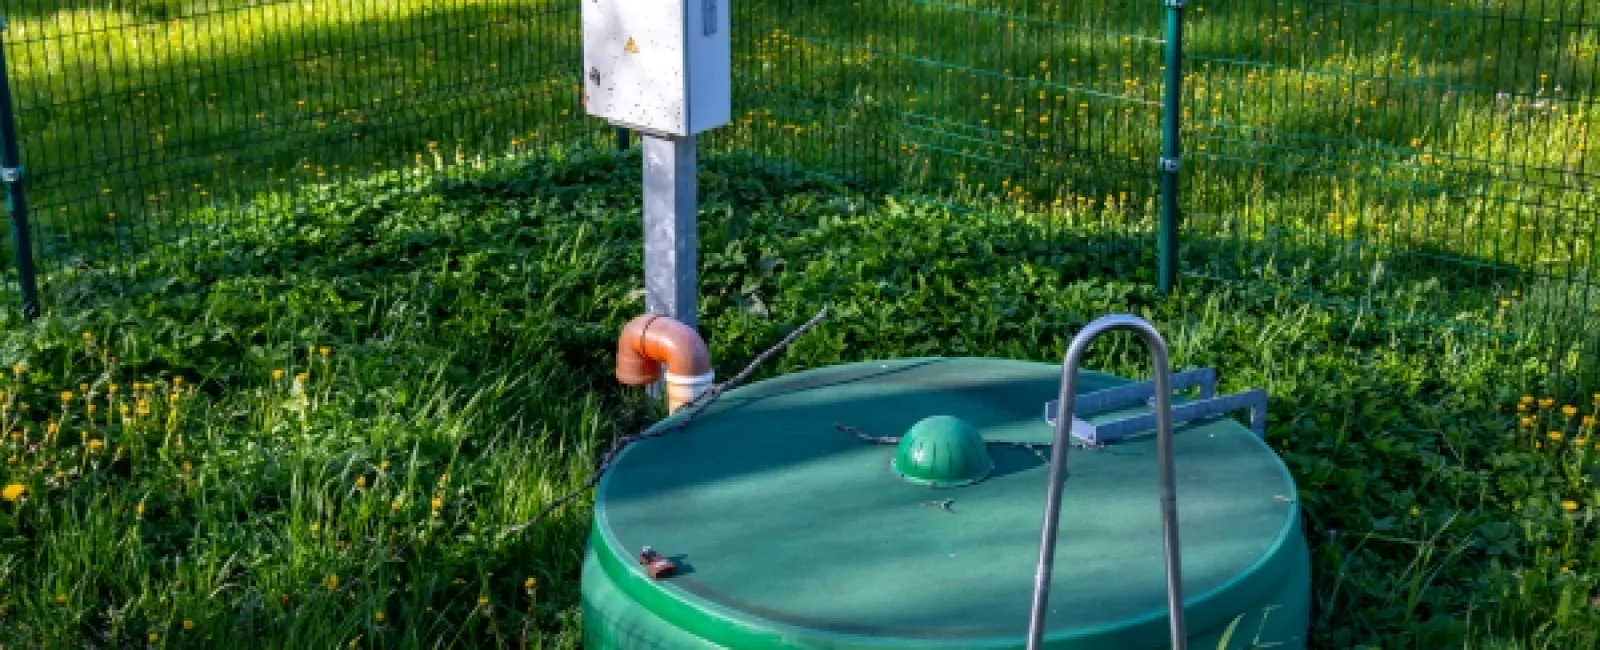 What Are the Different Types of Septic Systems?